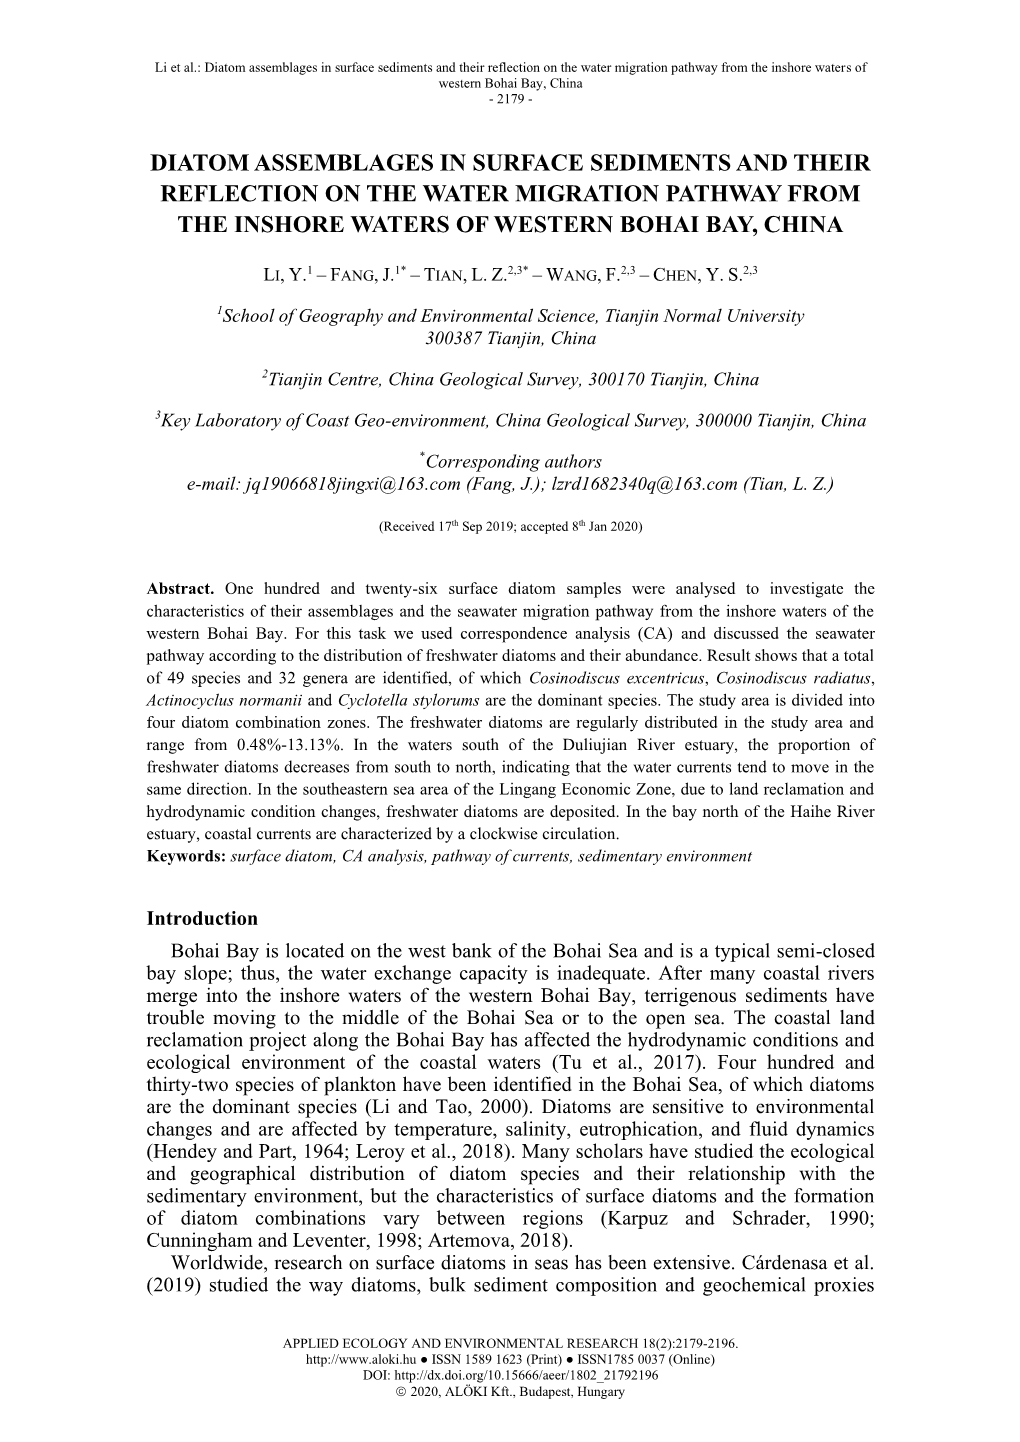 Diatom Assemblages in Surface Sediments and Their Reflection on the Water Migration Pathway from the Inshore Waters of Western Bohai Bay, China - 2179